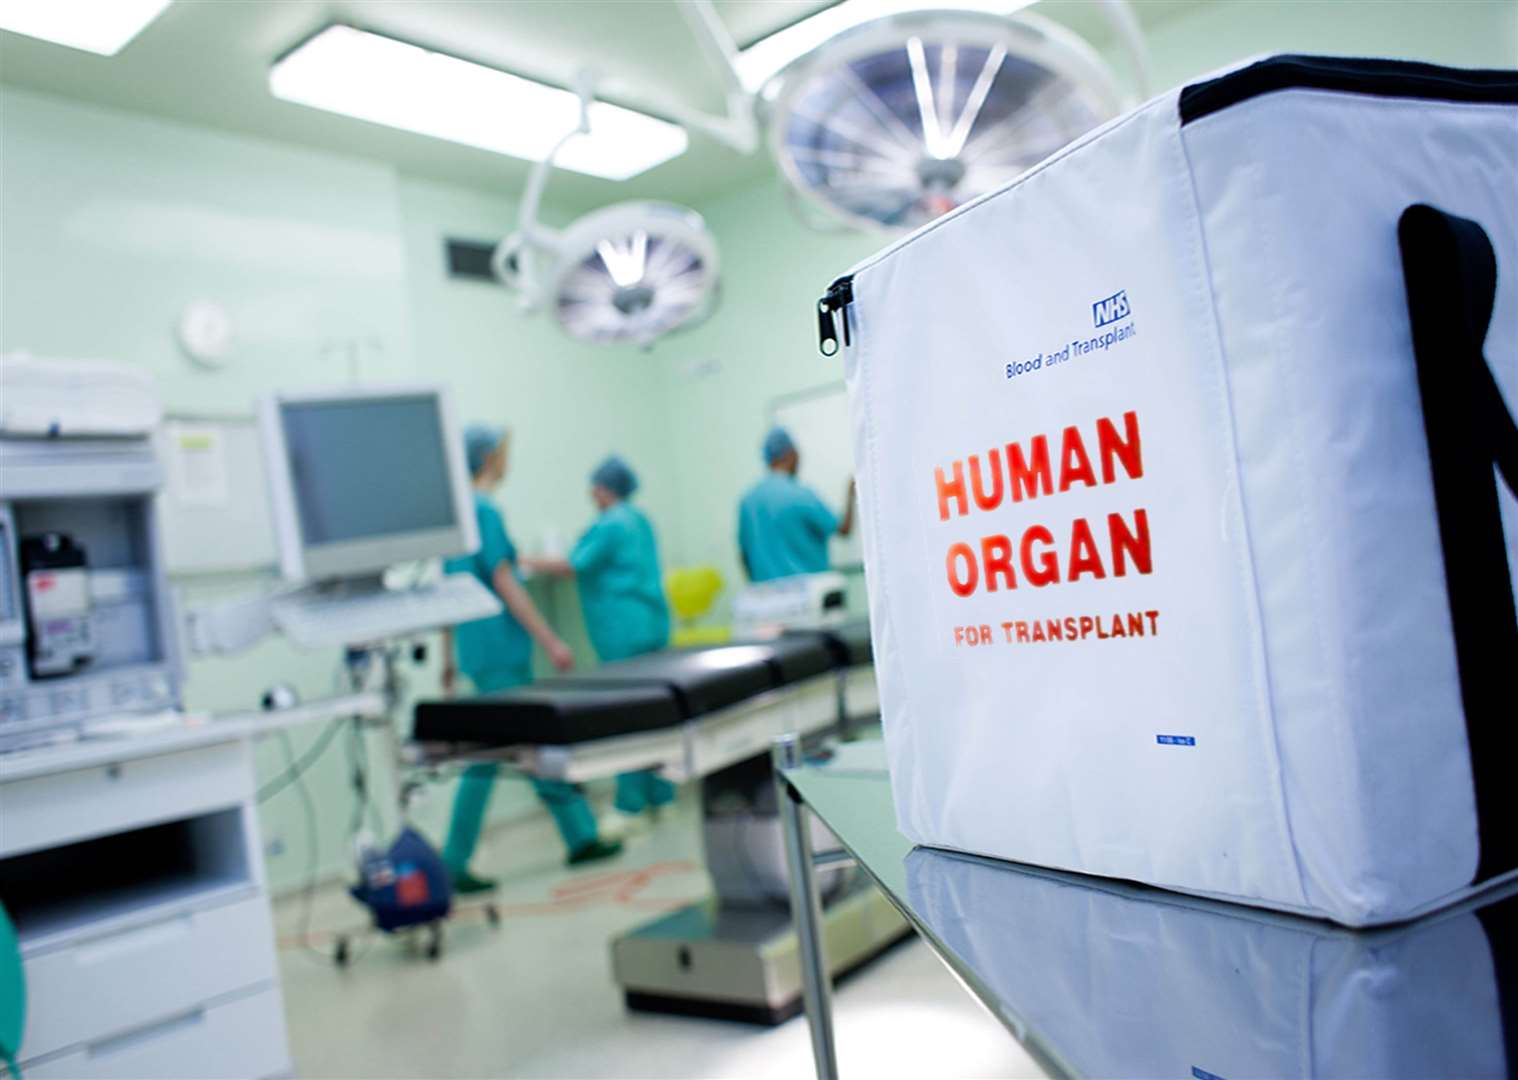 The law is now changing to an opt-out donor system